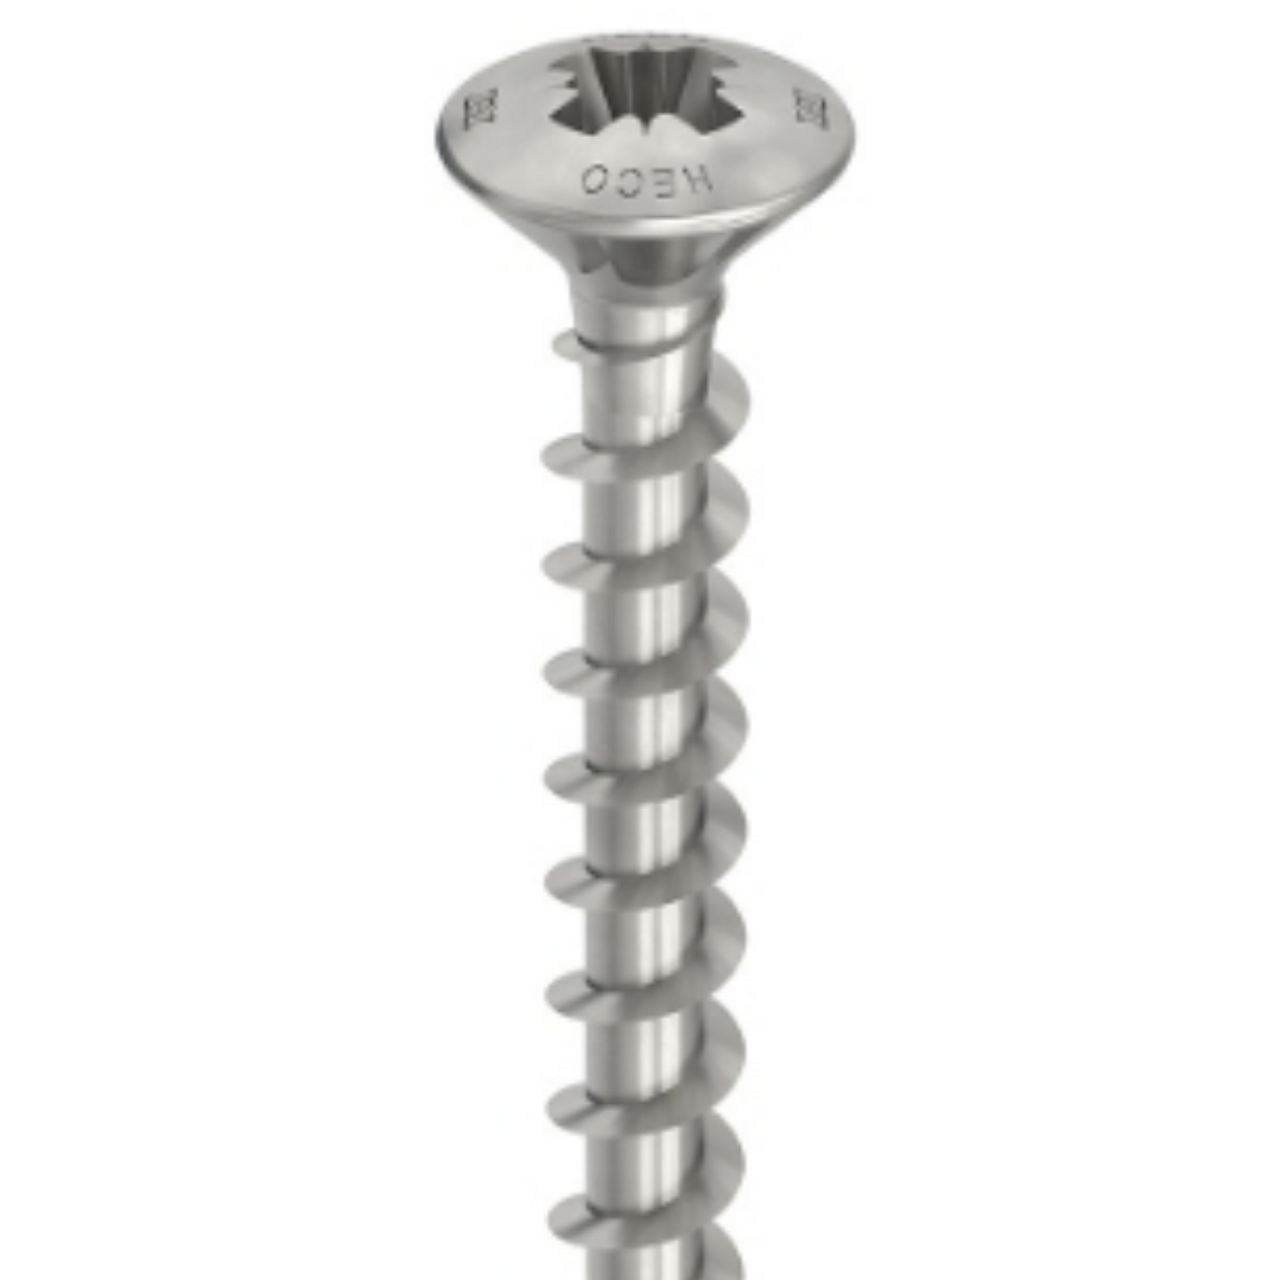 HECO Raised Countersunk Head Screws | Raised Countersunk Head Screws Cladding Screws with PZ Drive with A2 304 Stainless Steel for Hardware and General Purpose available in Sydney